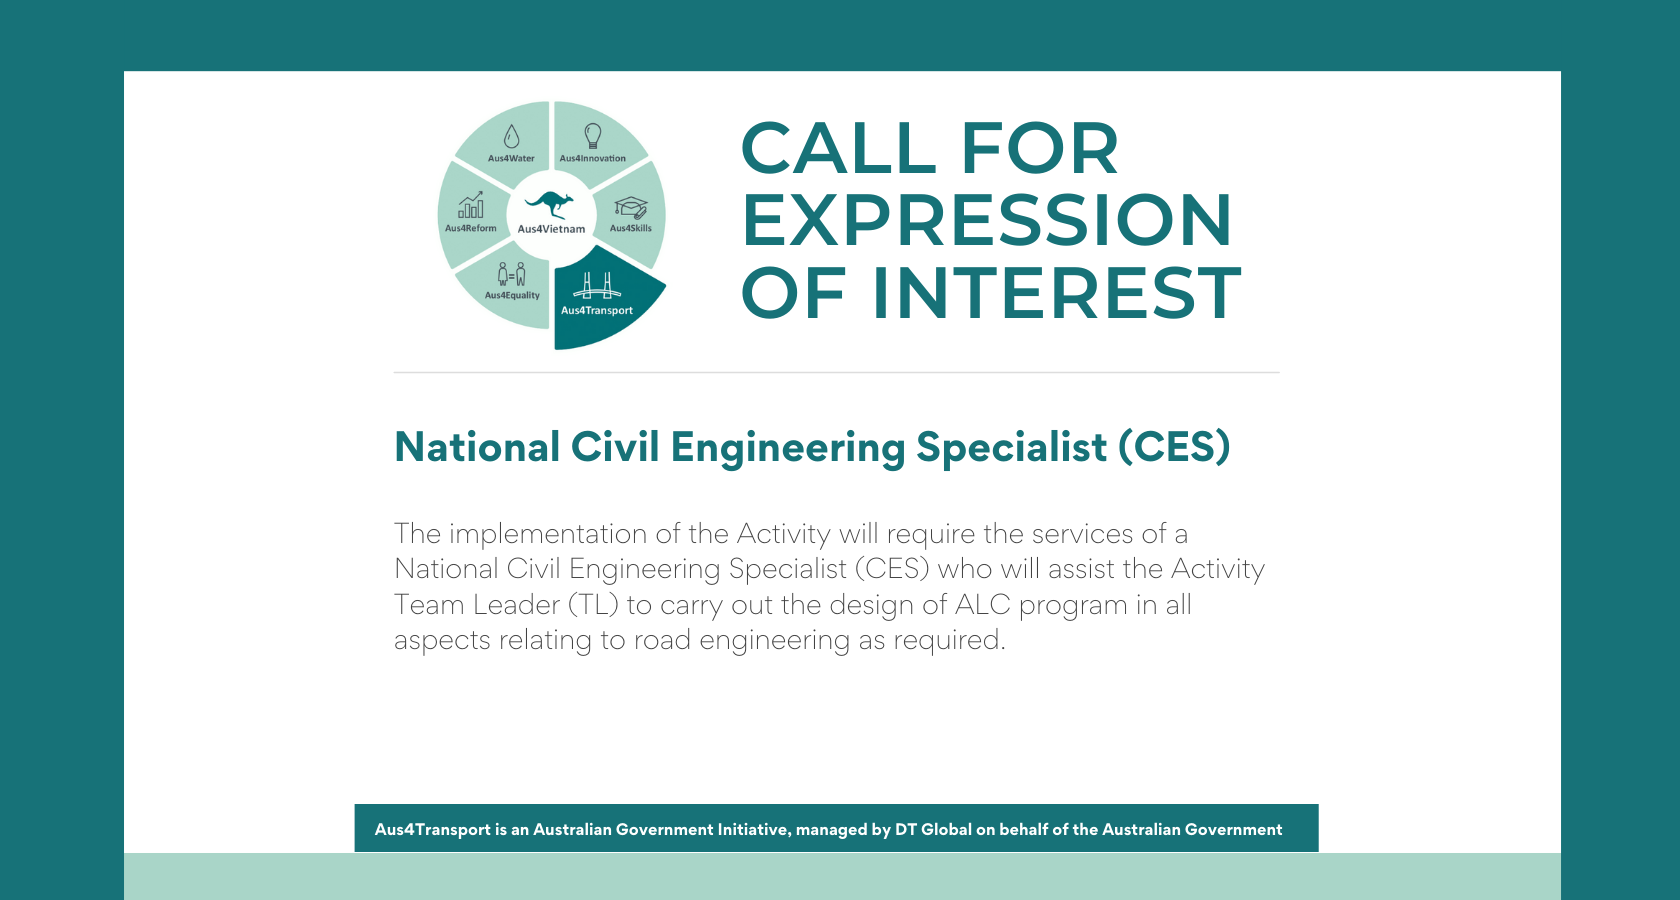 Aus4Transport - Recruitment of a National Civil Engineering Specialist (CES)